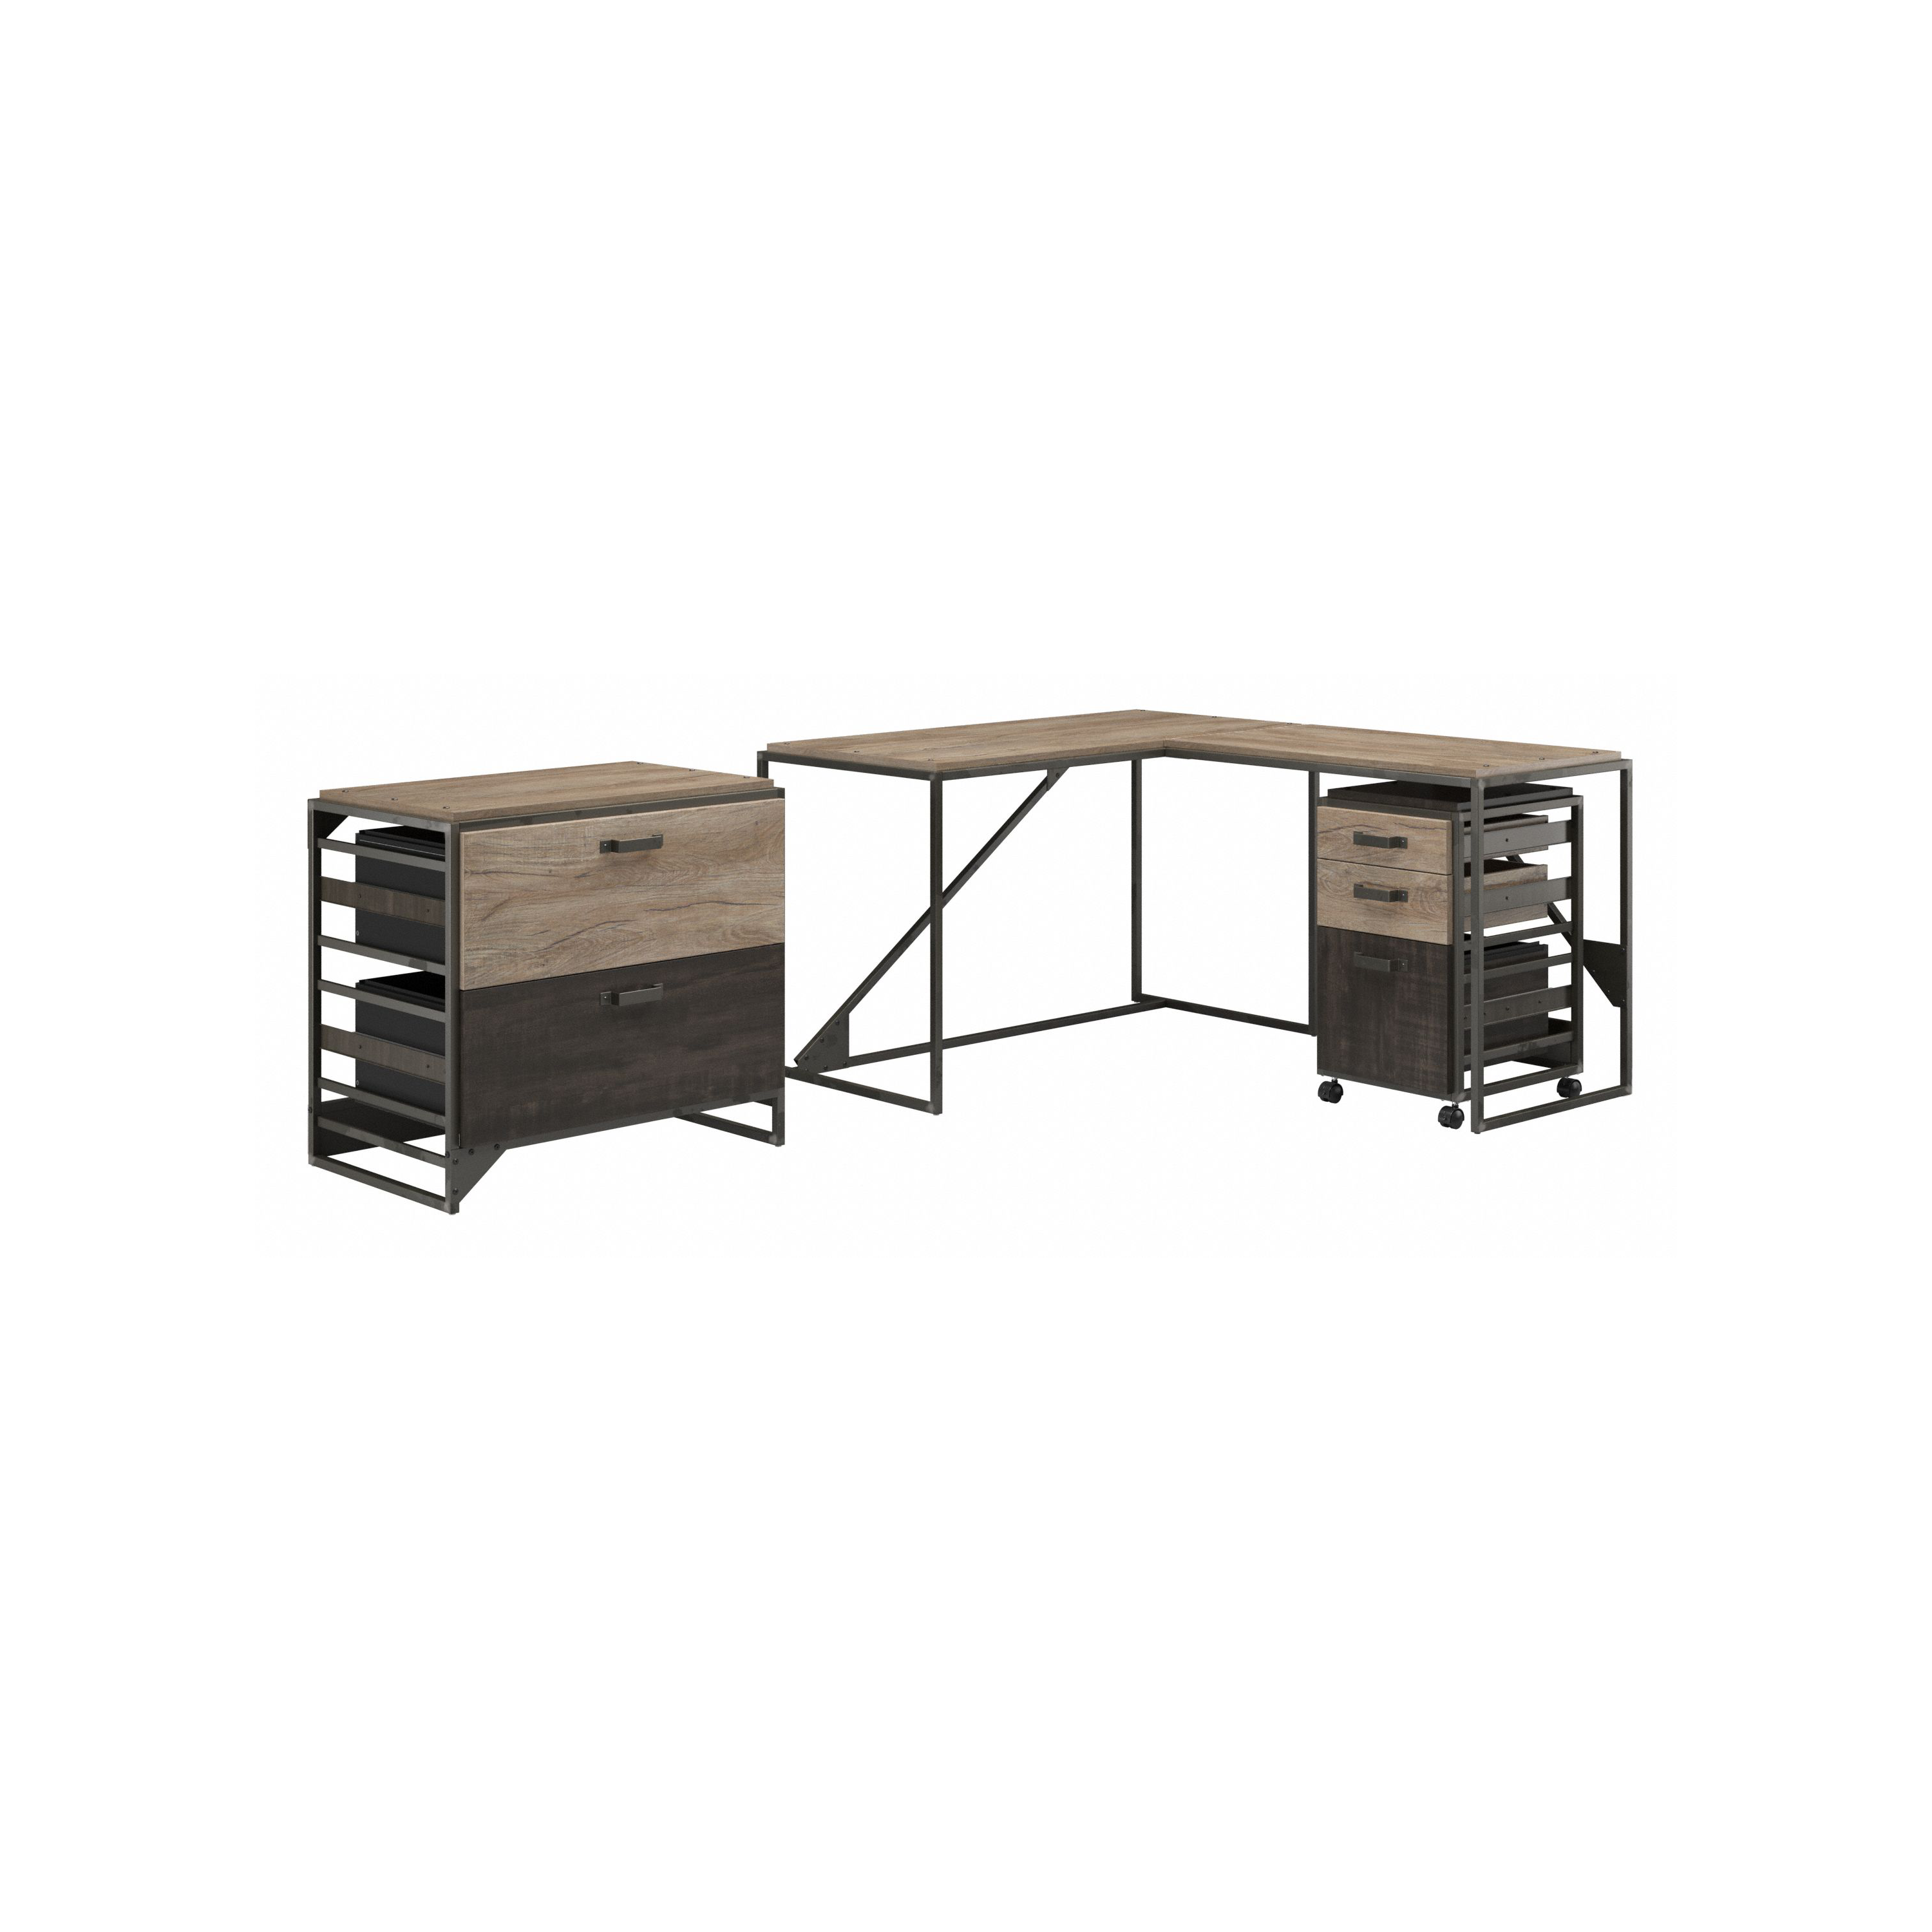 Shop Bush Furniture Refinery 50W L Shaped Industrial Desk with File Cabinets 02 RFY009RG #color_rustic gray/charred wood